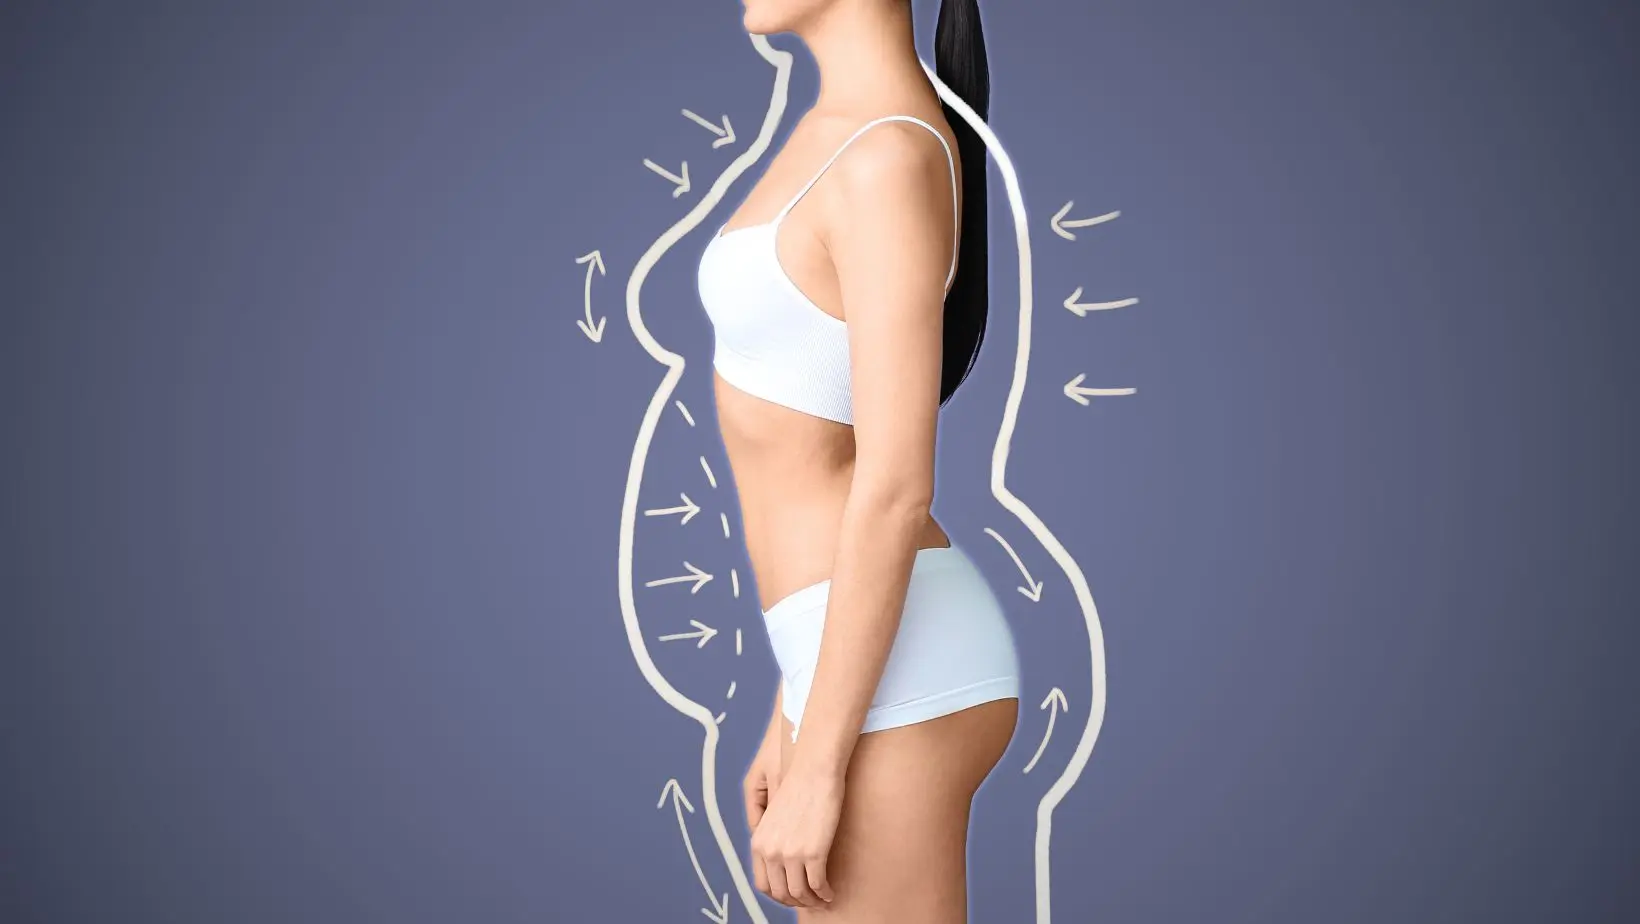 An introduction to non-invasive body contouring - Body Contouring Academy